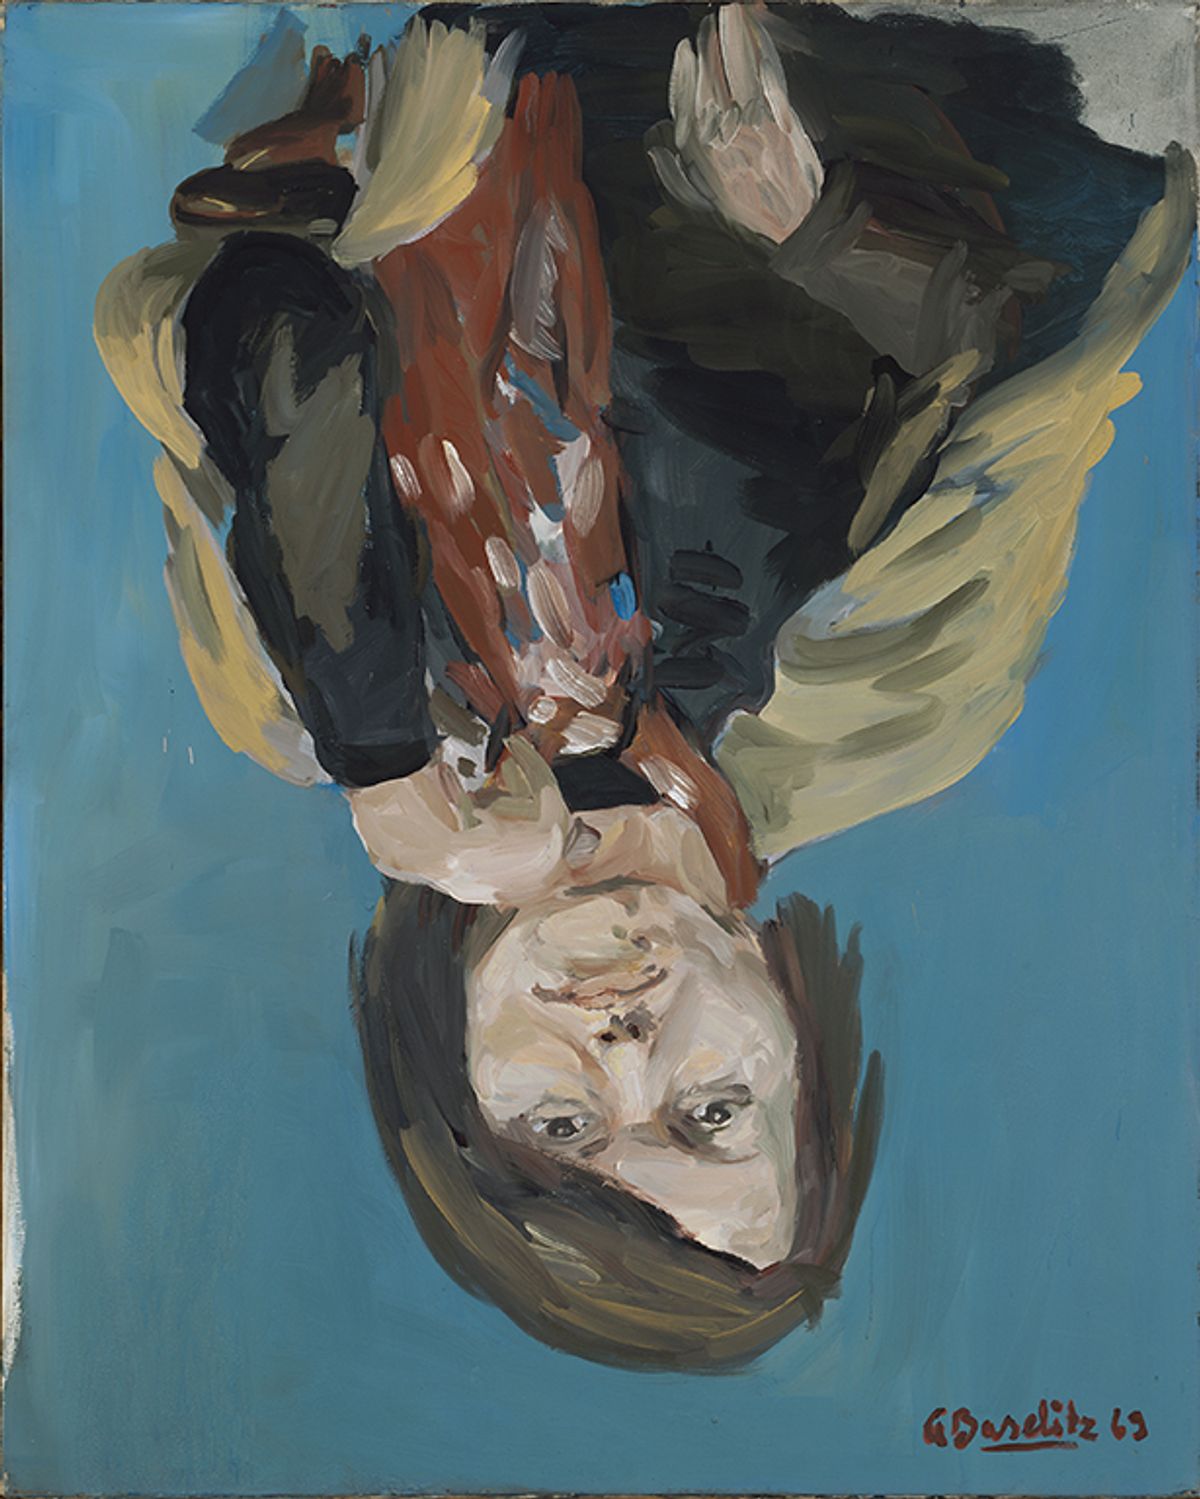 Georg Baselitz's Portrait of Elke I, one of six 1969 paintings donated by the artist and his wife to the Metropolitan Museum of Art The Metropolitan Museum of Art, Gift of the Baselitz Family, 2020, © Georg Baselitz 2021